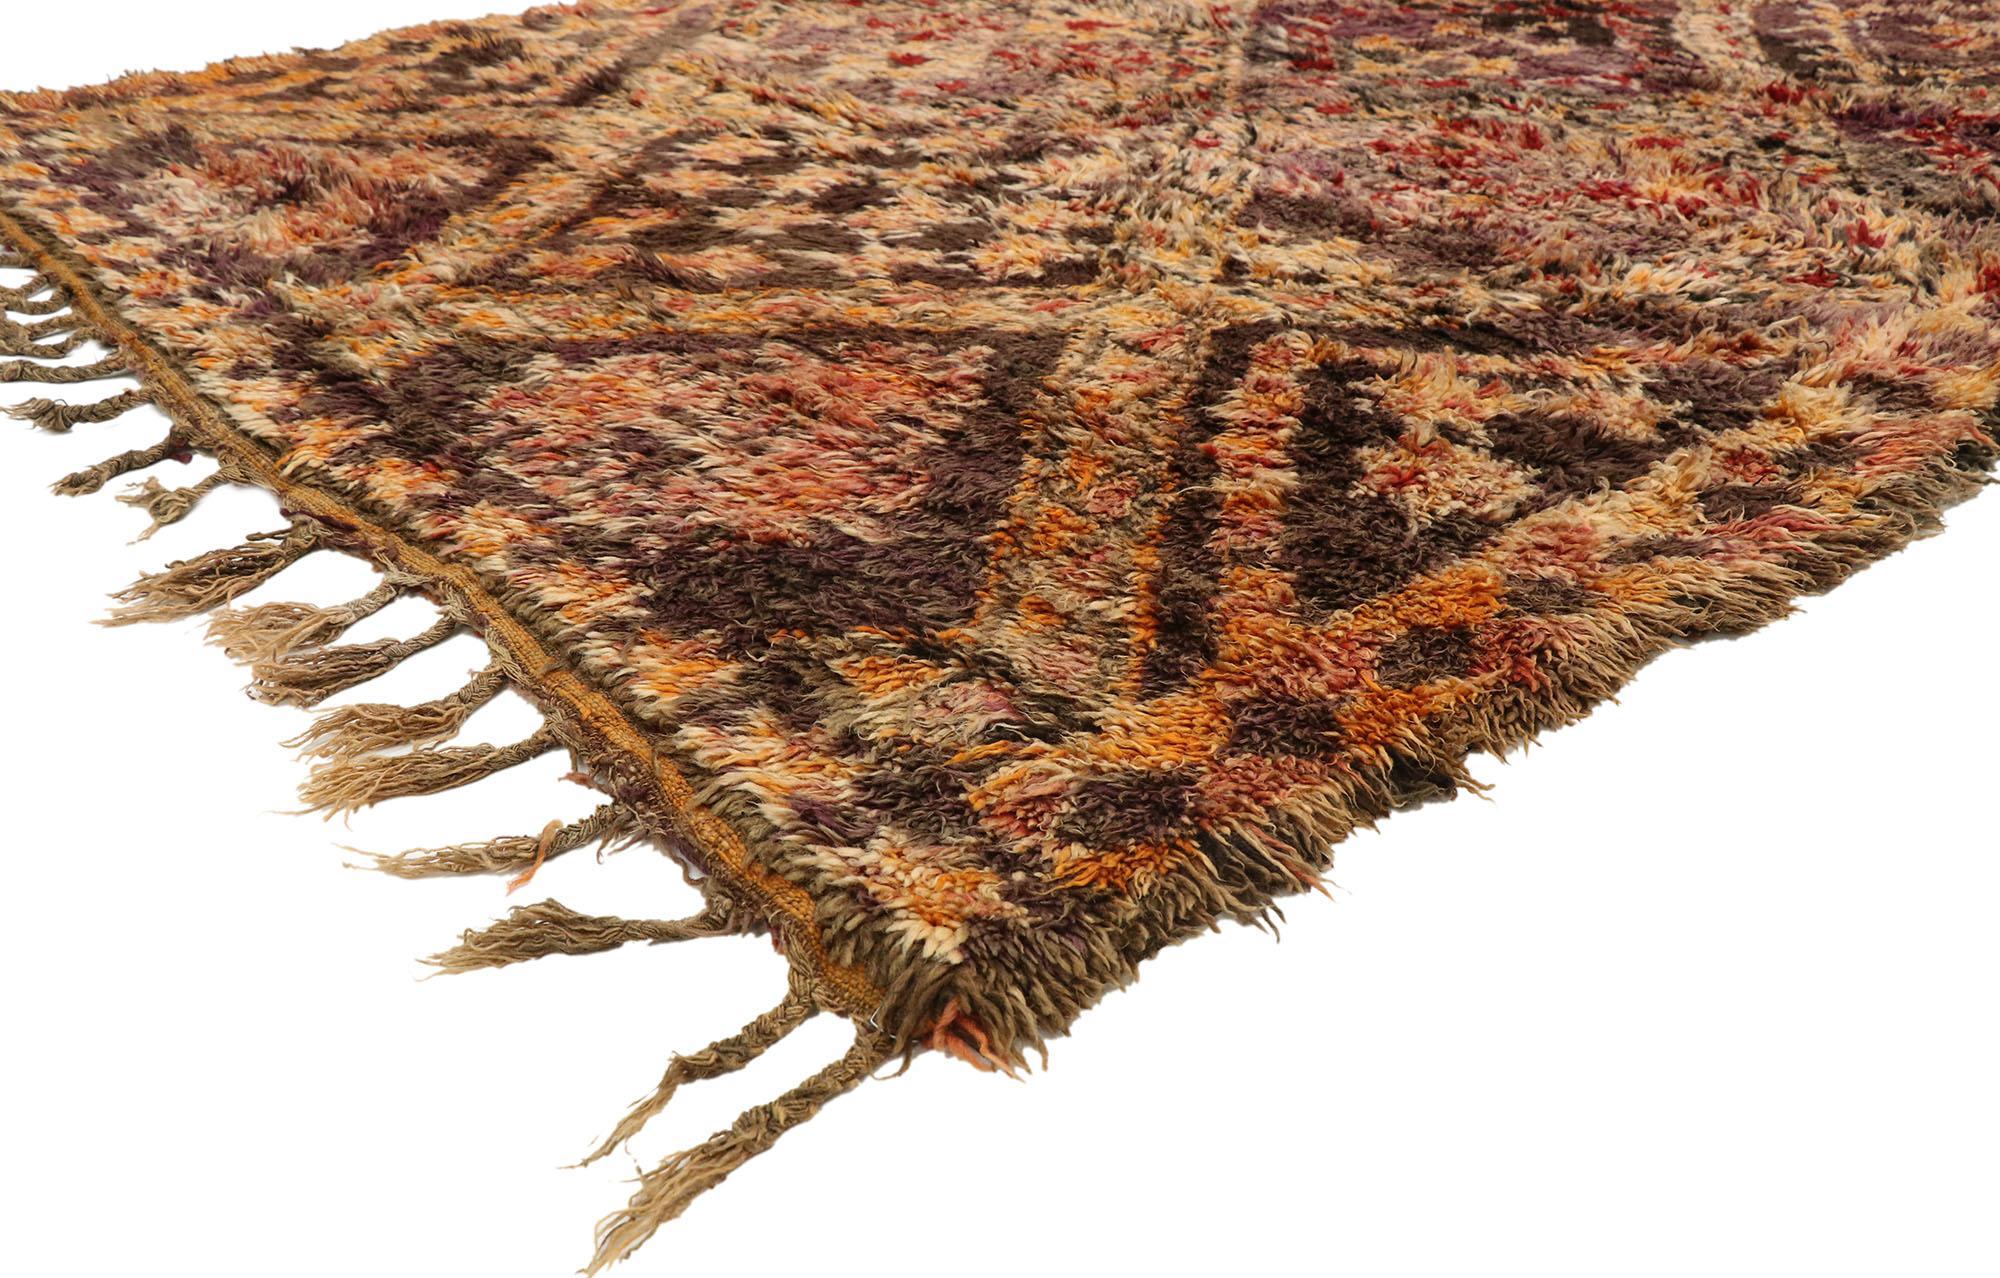 21018, vintage Berber Moroccan rug, brown Zayane carpet with Mid-Century Modern style. This hand knotted wool vintage Zayane Moroccan rug features a lozenge trellis composed of concentric diamonds, cross motifs, arrows, and burdock symbols, which